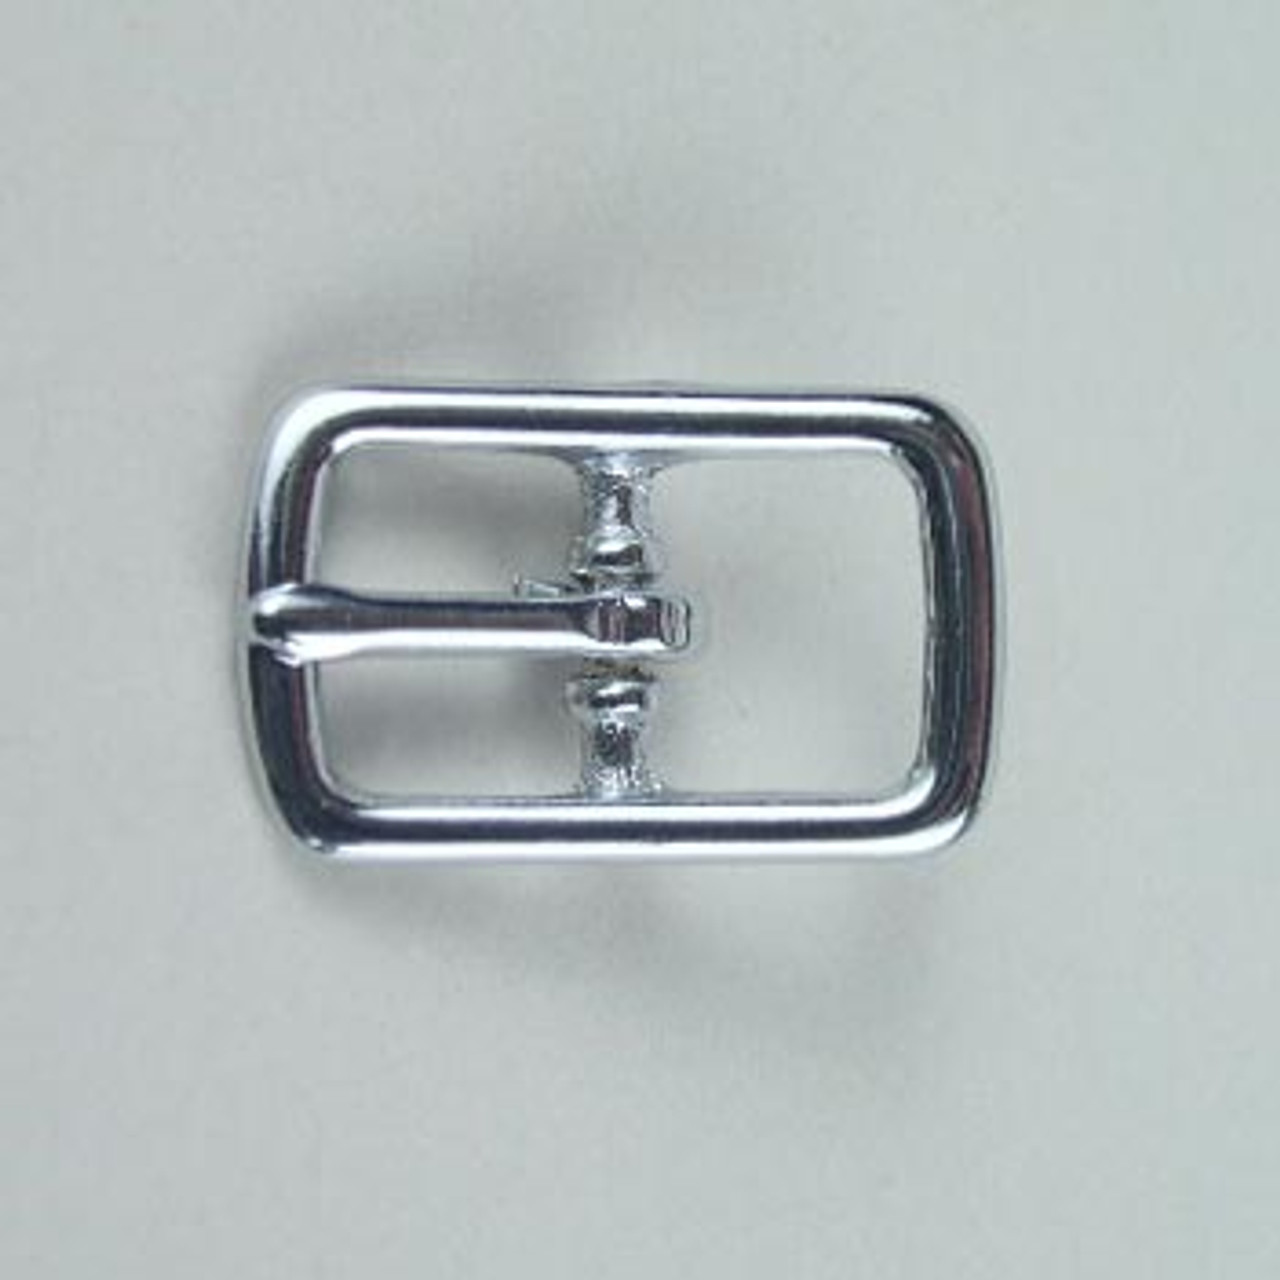 1/2 inch Chrome Polished Solid Brass Belt Buckle - A4